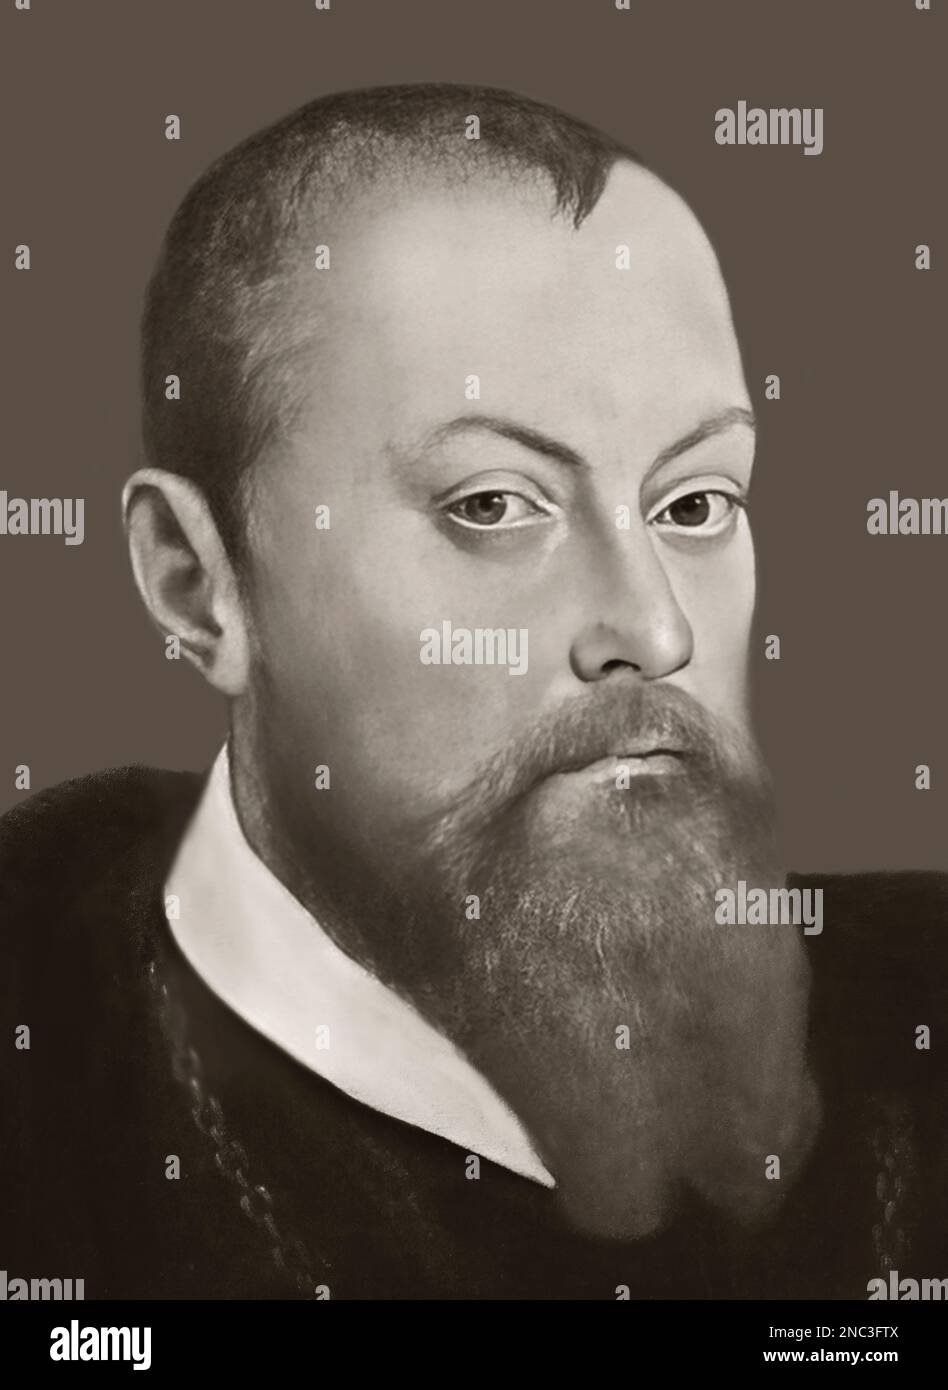 Moritz von Sachsen, Maurice, 1521-1553, Duke and later Elector of Saxony, digitally altered Stock Photo